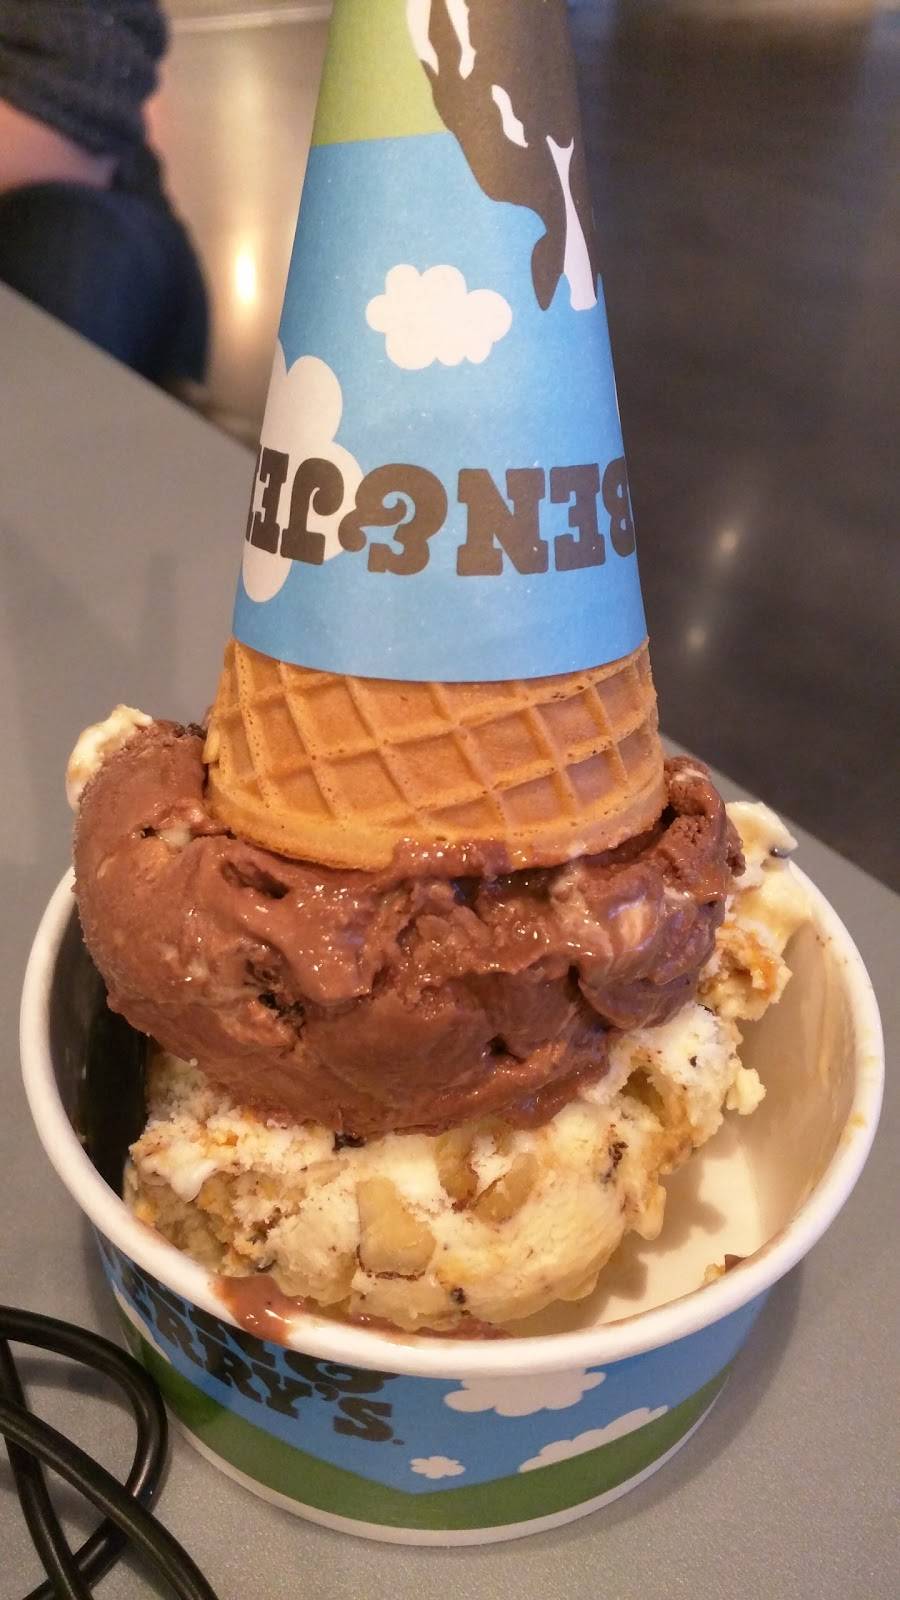 Ben & Jerrys | bakery | 600 E Grand Ave, Chicago, IL 60611, USA | 3128360992 OR +1 312-836-0992